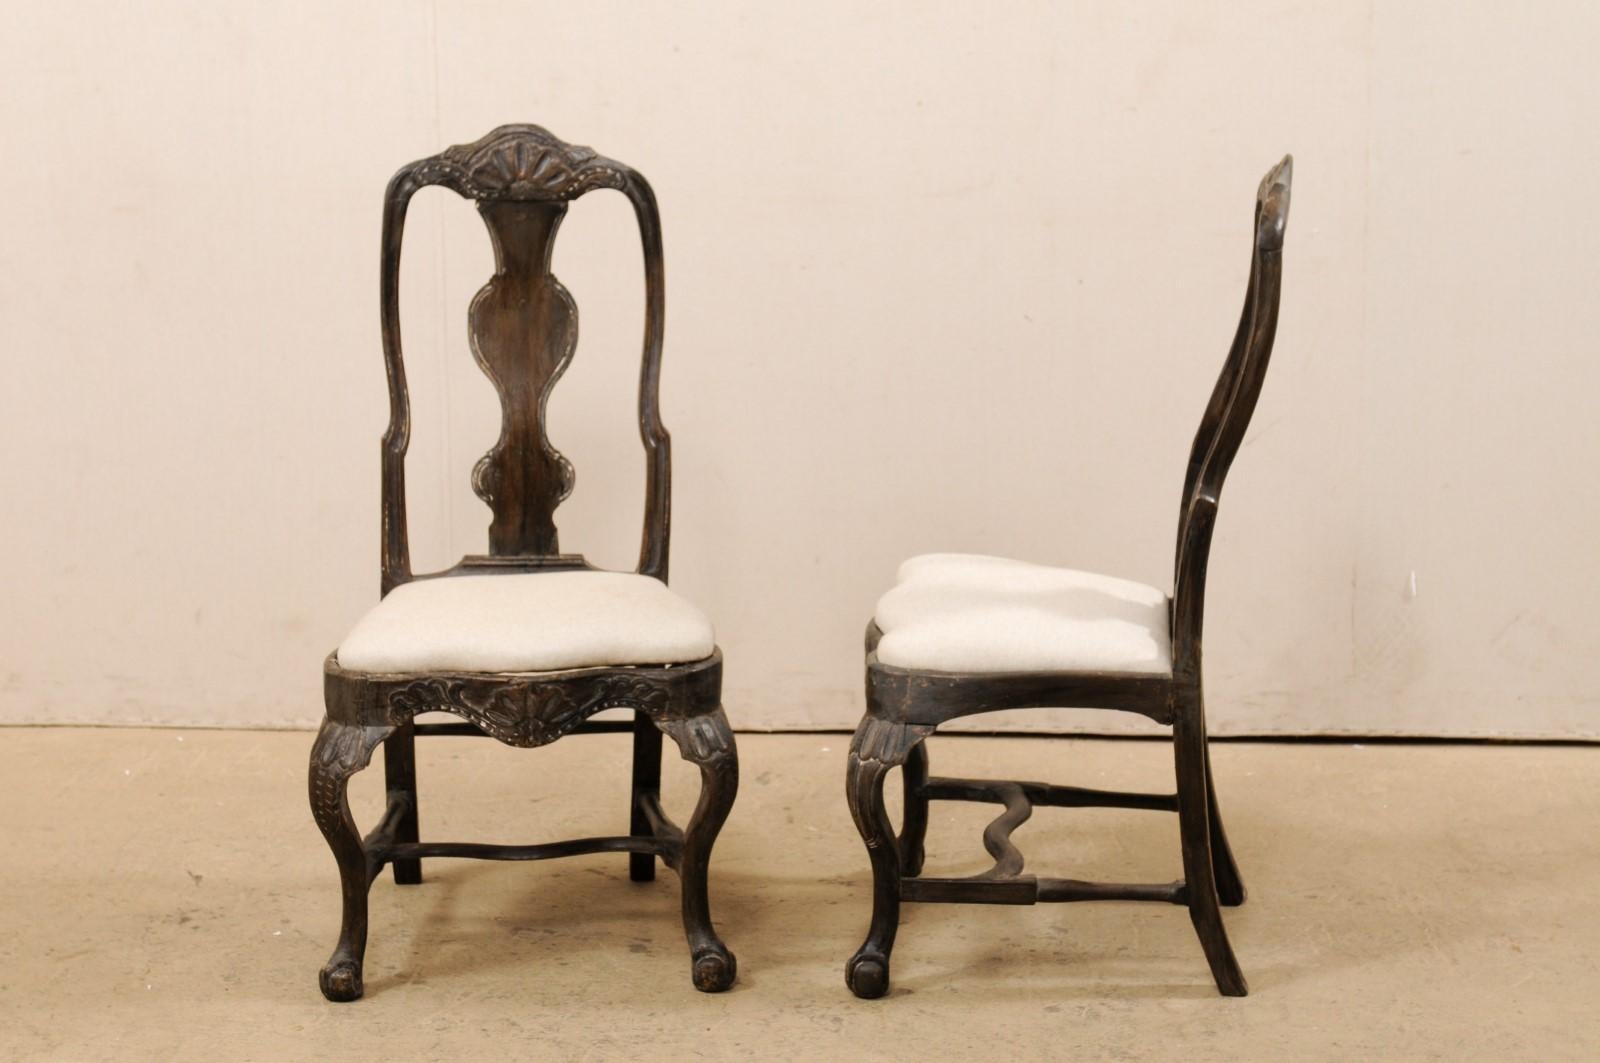 Pair of Swedish Period Rococo Carved-Wood Side Chairs, 18th Century For Sale 5